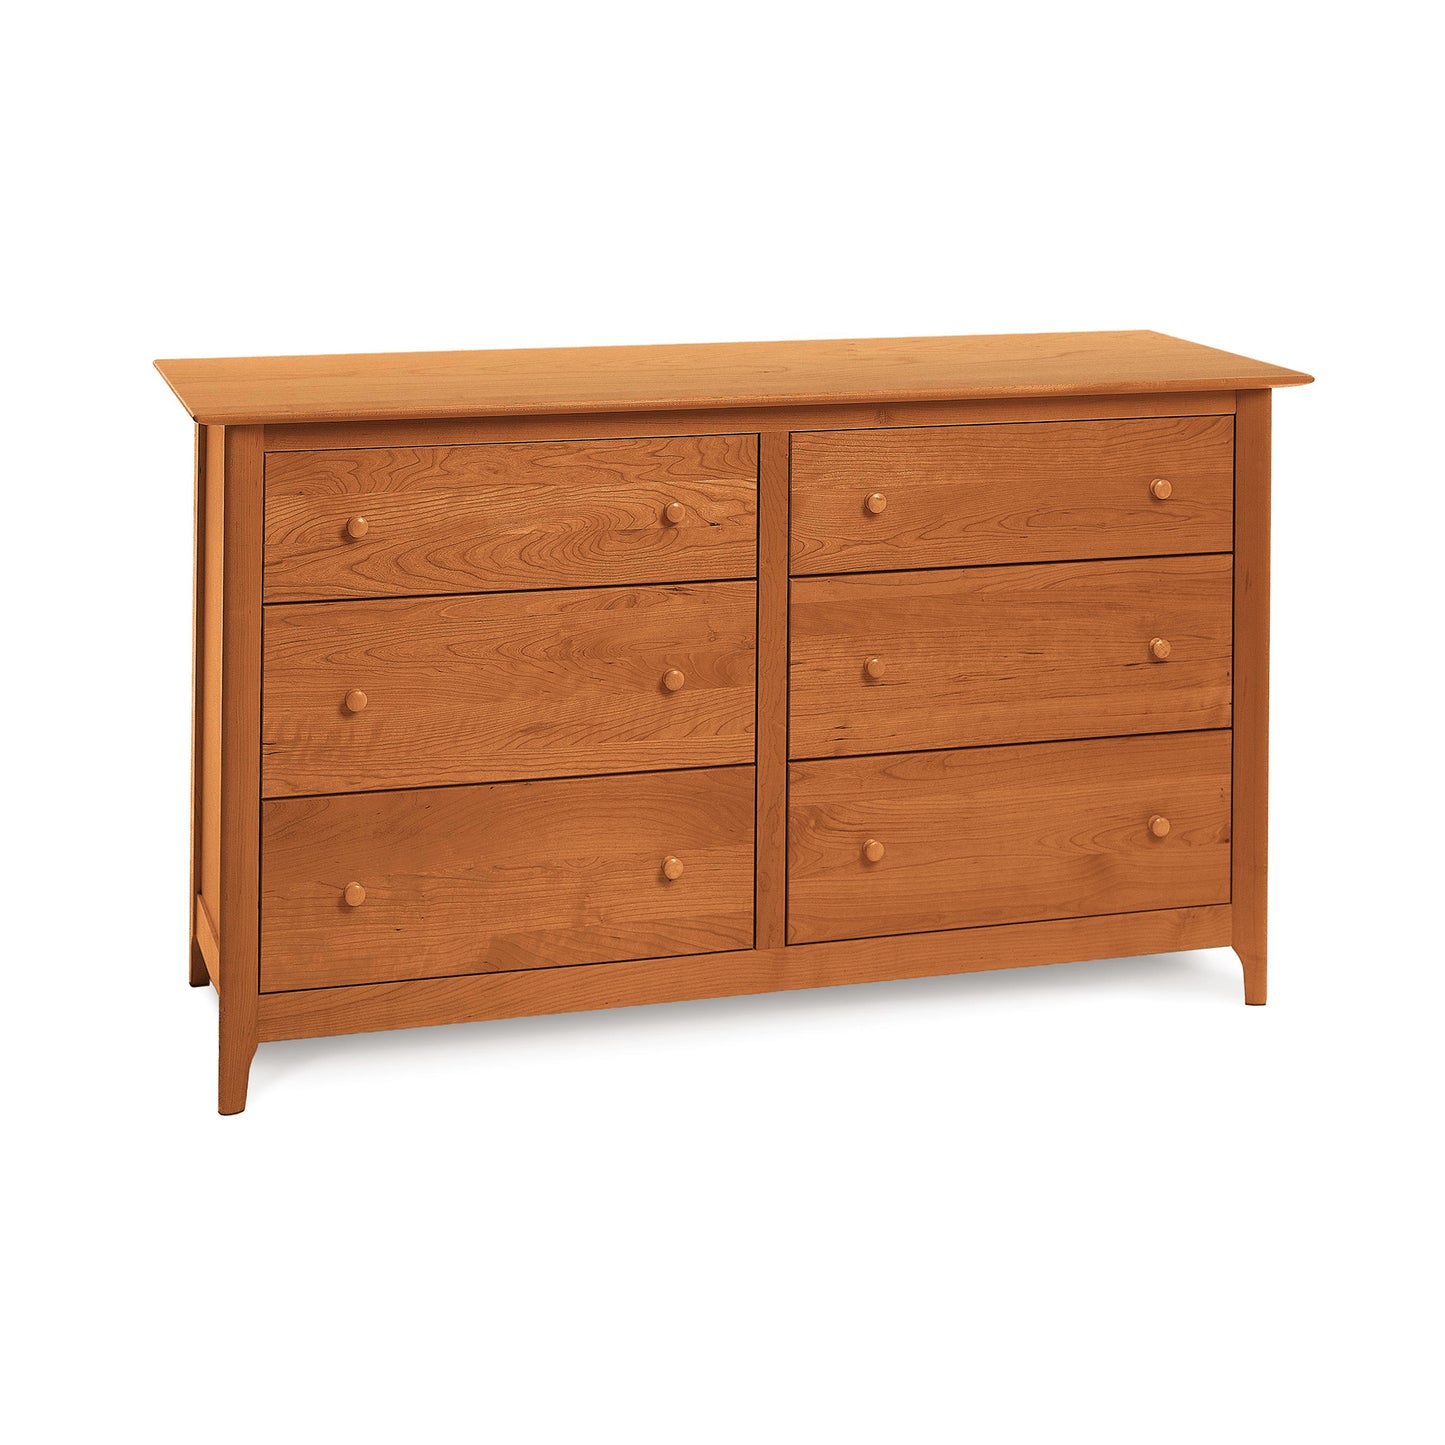 A Sarah 6-Drawer Dresser by Copeland Furniture, with drawers on a white background, featuring American Shaker design.